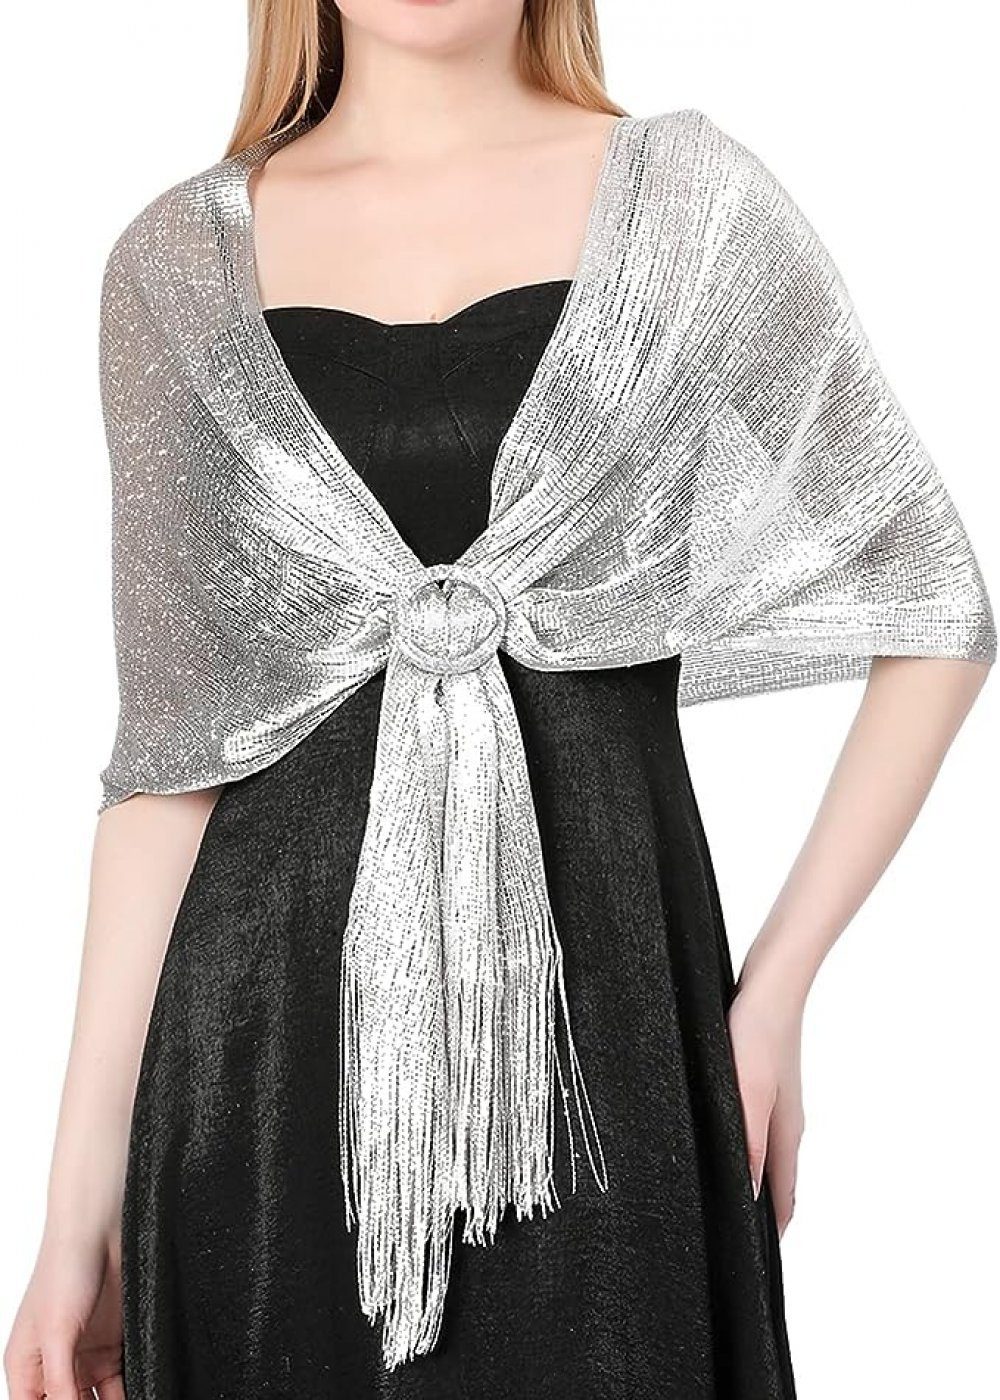 evening silbrig for metal suitable Holiday parties sparkling shawl WaKuKa Schal buckle